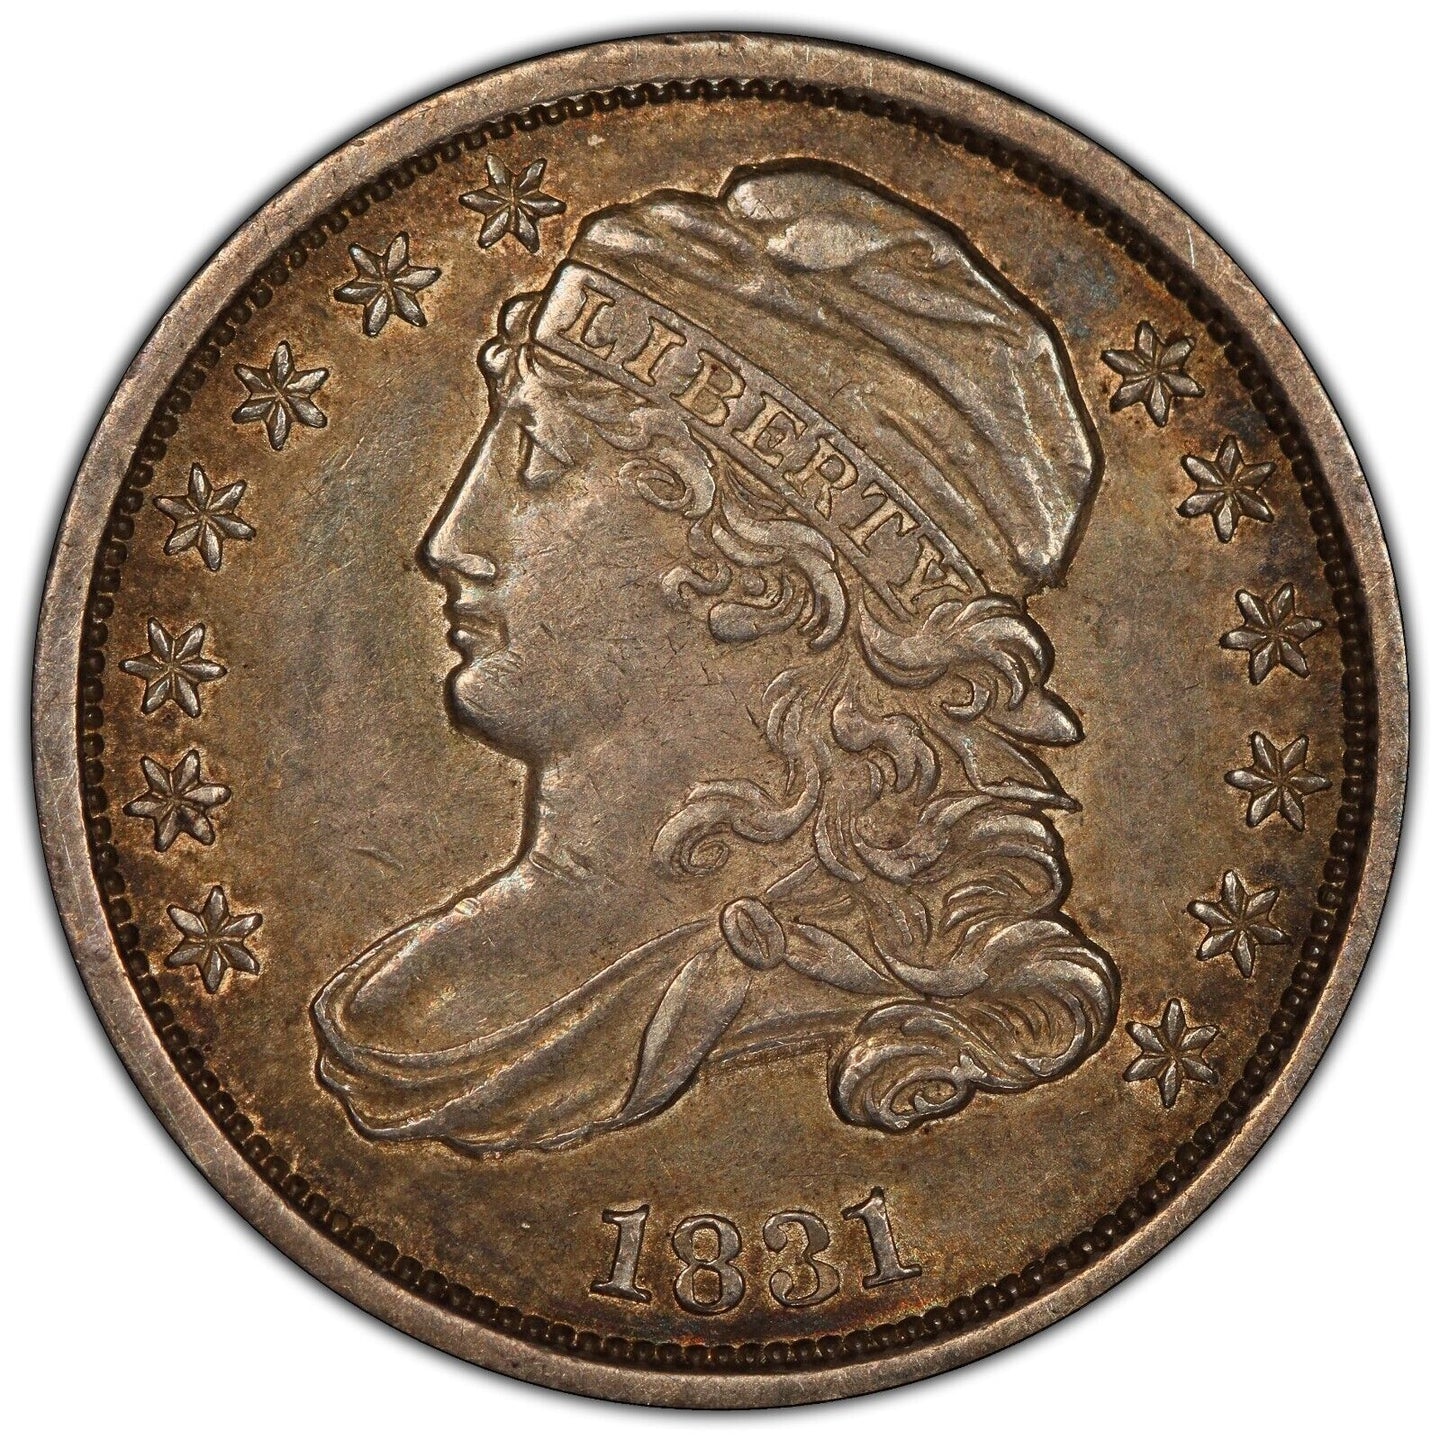 1831 Capped Bust Dime - PCGS AU50 CAC - Exceptional Eye Appeal & Originality!!